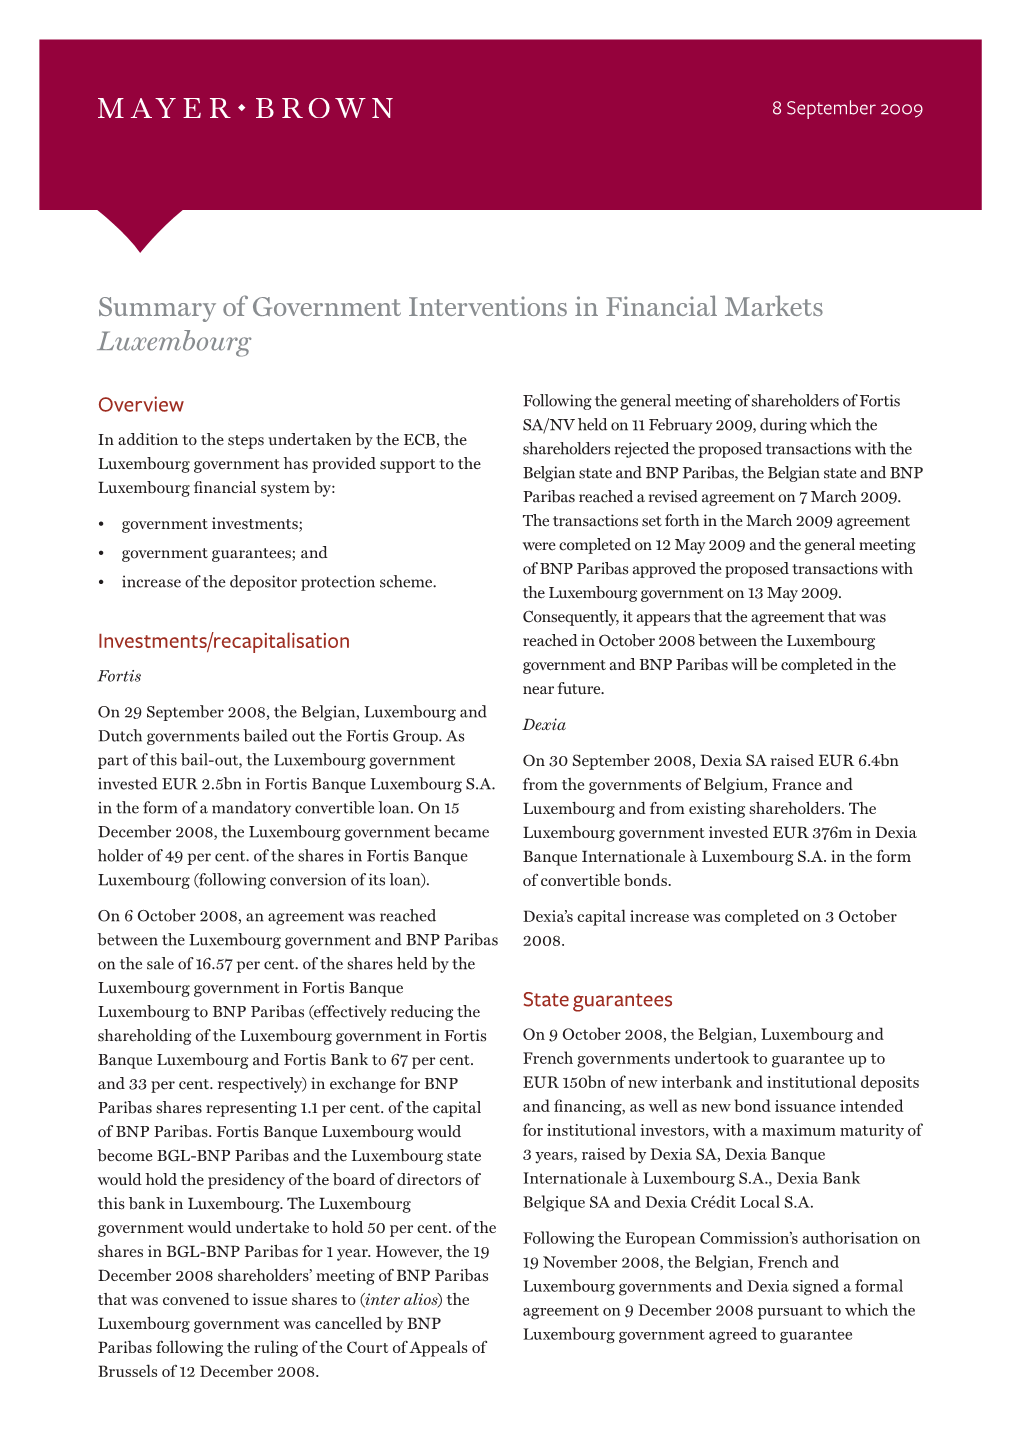 Summary of Government Interventions in Financial Markets Luxembourg